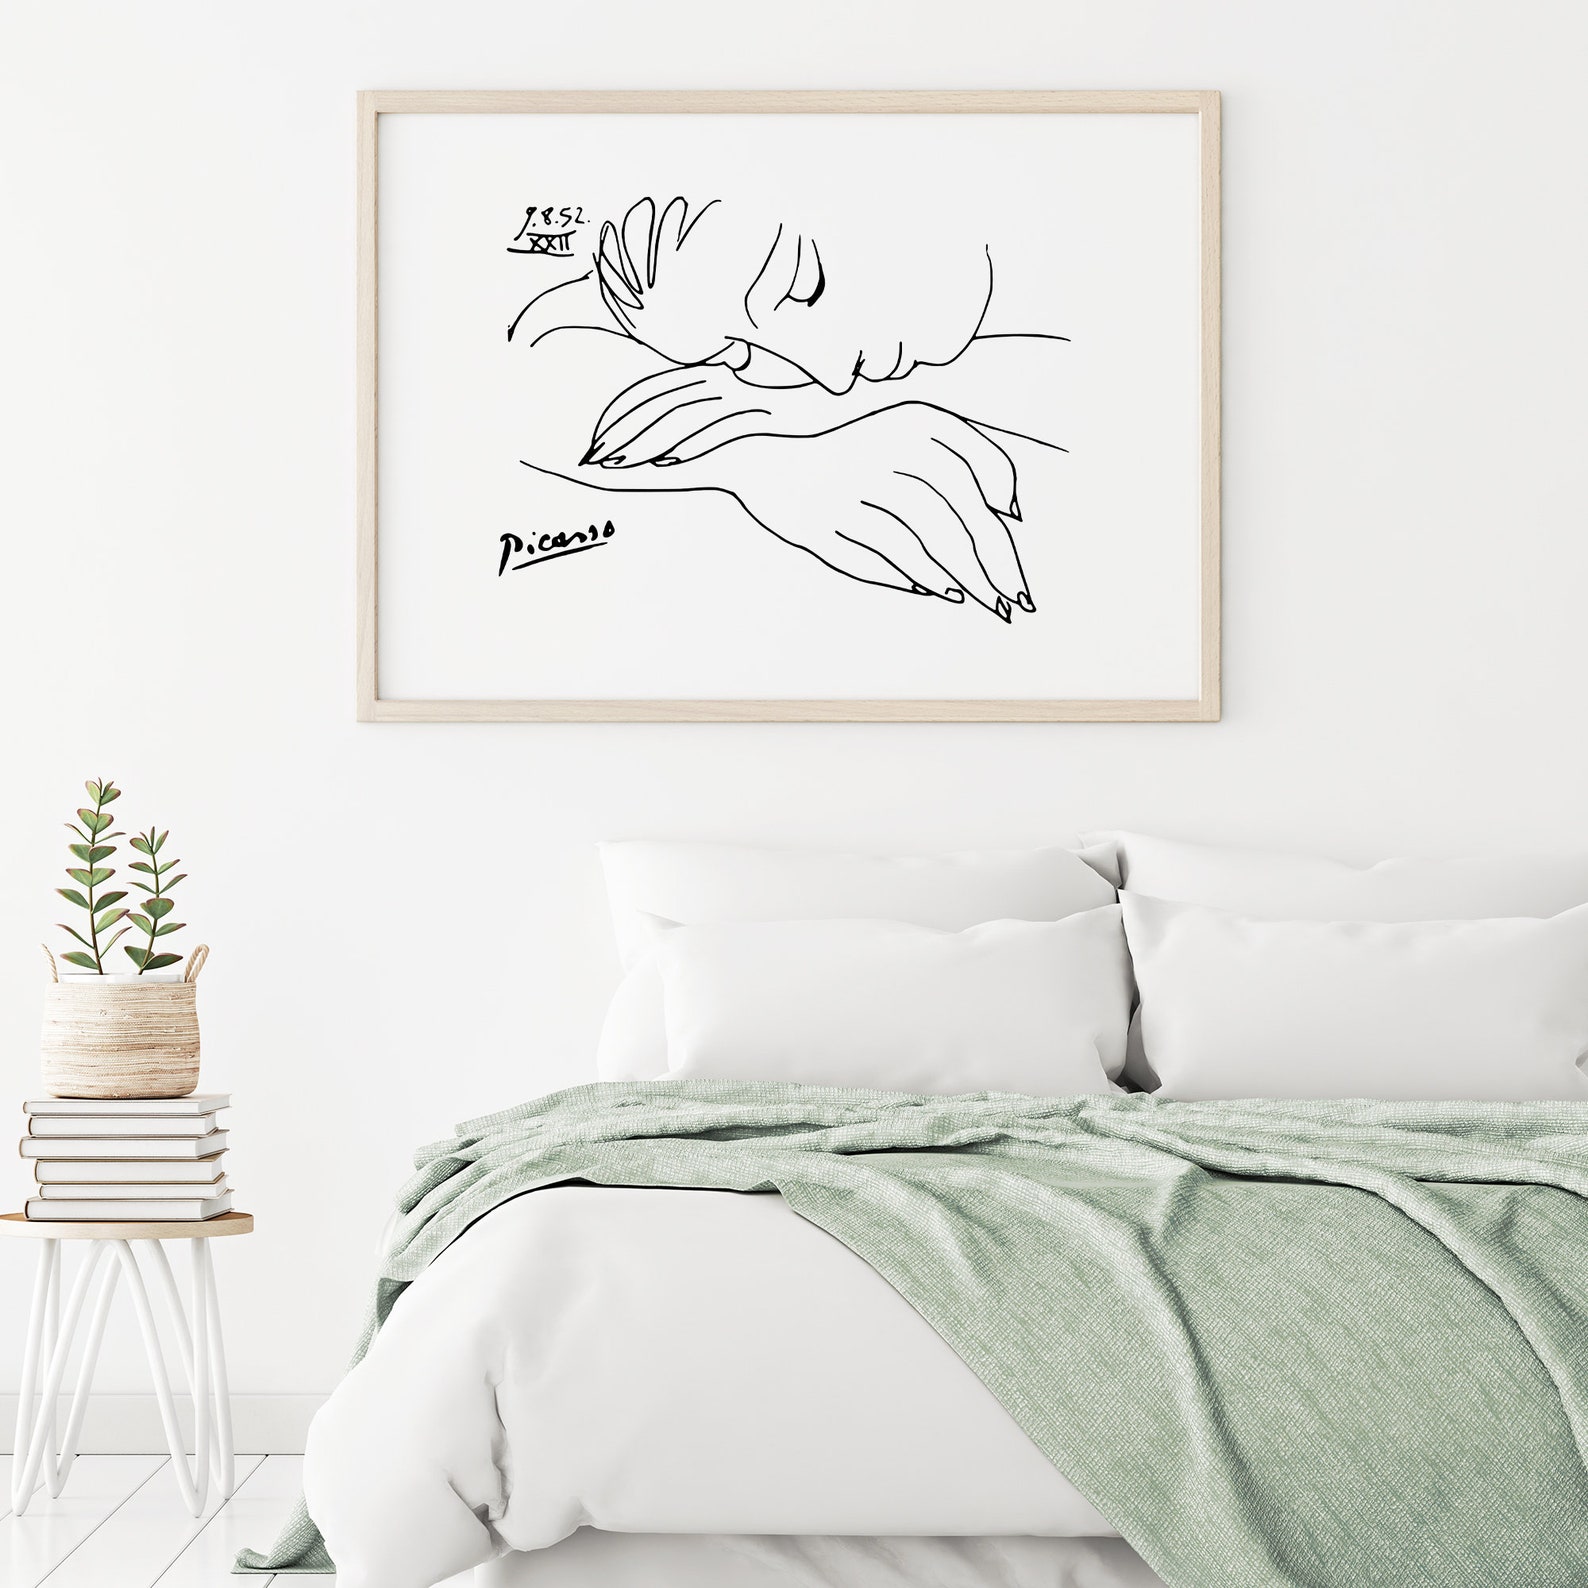 Picasso Sleeping Woman Wall Art Pablo Picasso Print Picasso | Etsy